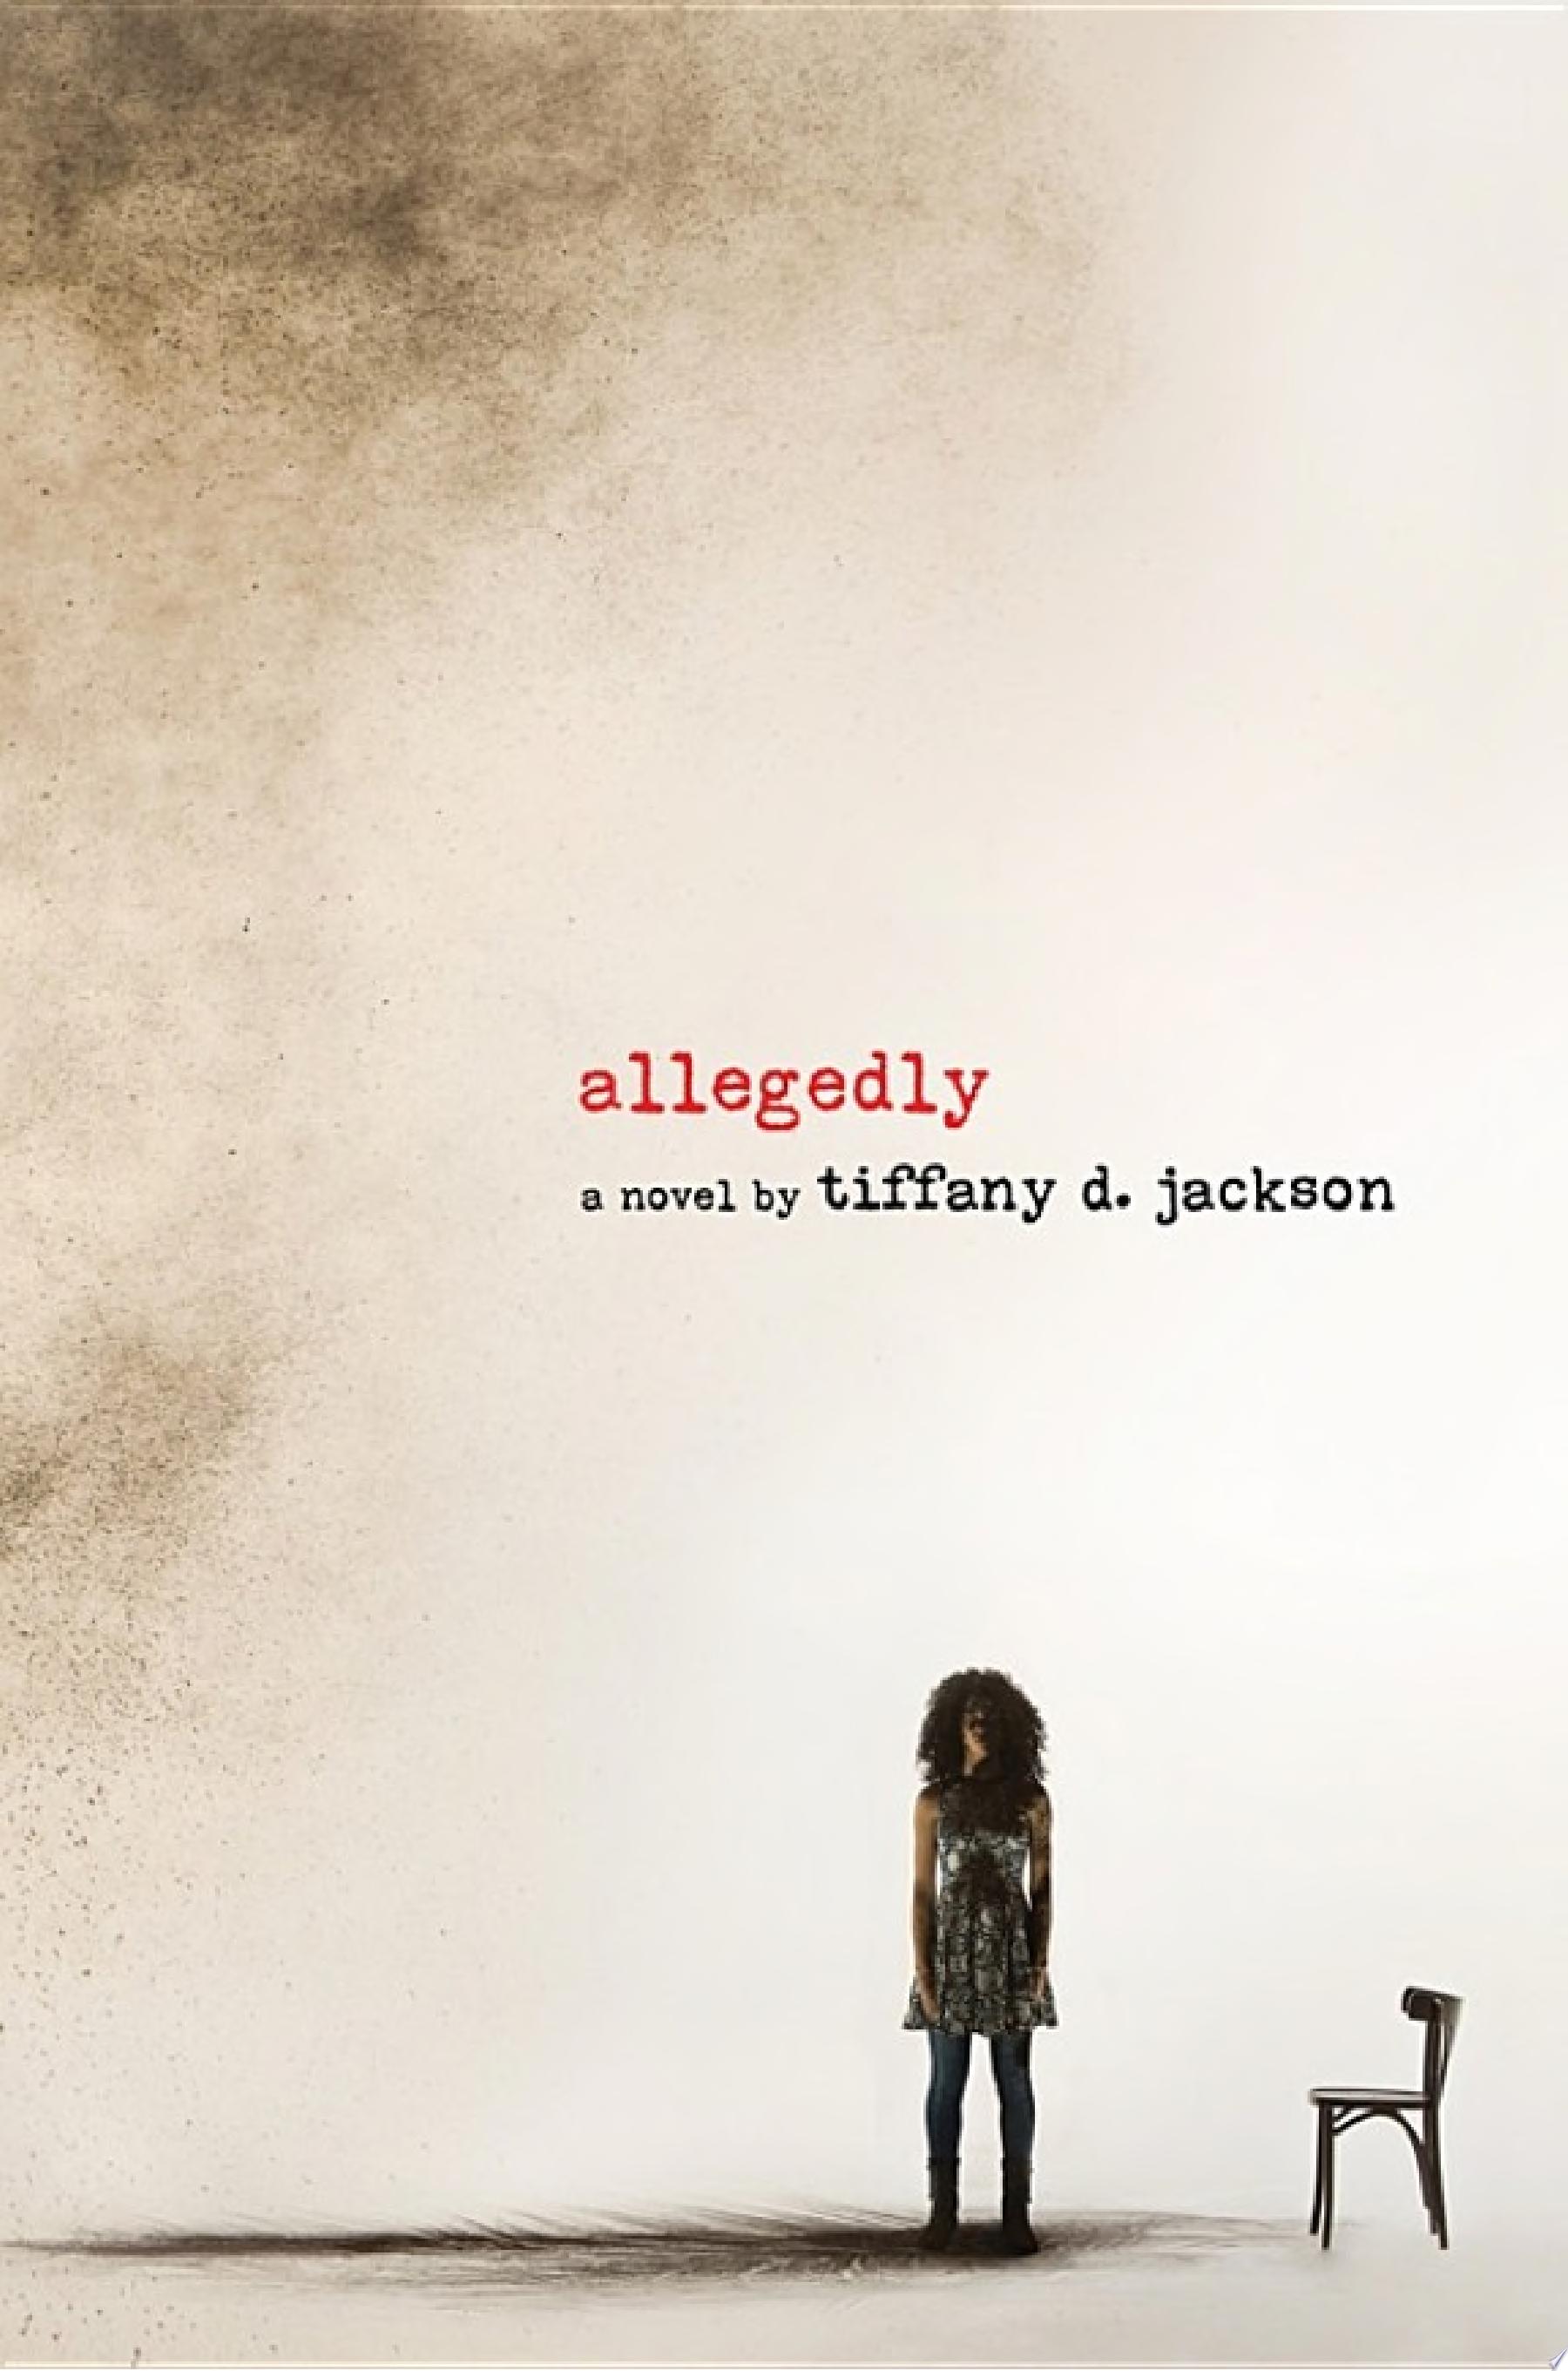 Image for "Allegedly"